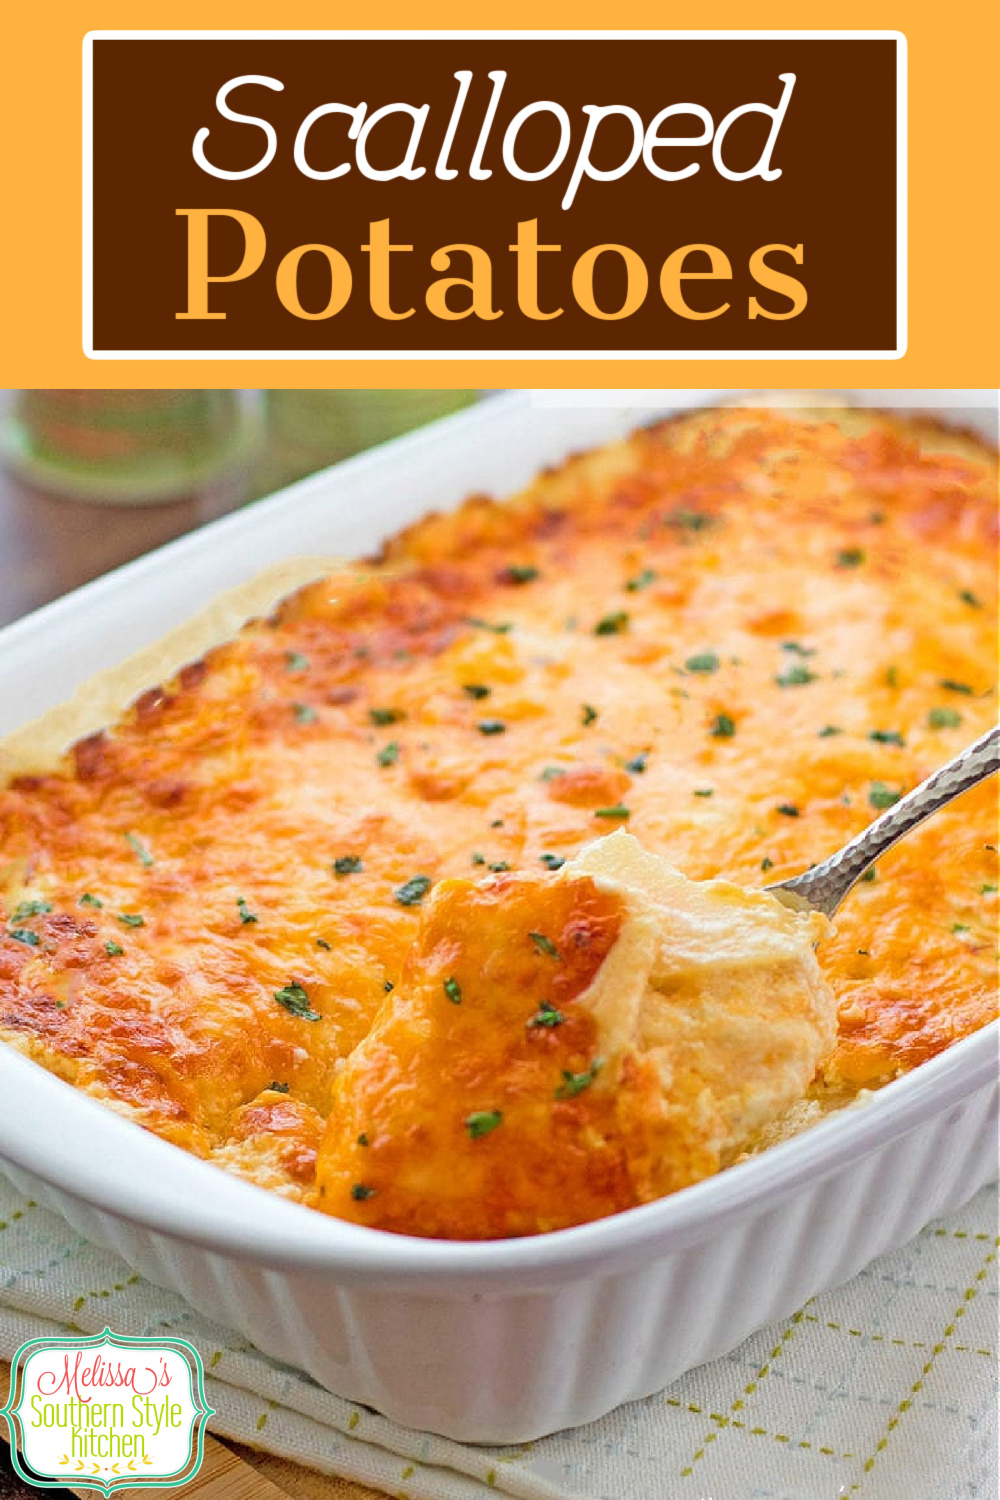 This cheesy Scalloped Potatoes Recipe will turn any occasion into something special #scallopedpotatoes #potatocasserole #cheesypotatoes #potaoes #casseroles #potatogratin #augratinpotatoes #holidaysides #southernrecipes #dinnerideas #southernfood #melissassouthernstylekitchen via @melissasssk